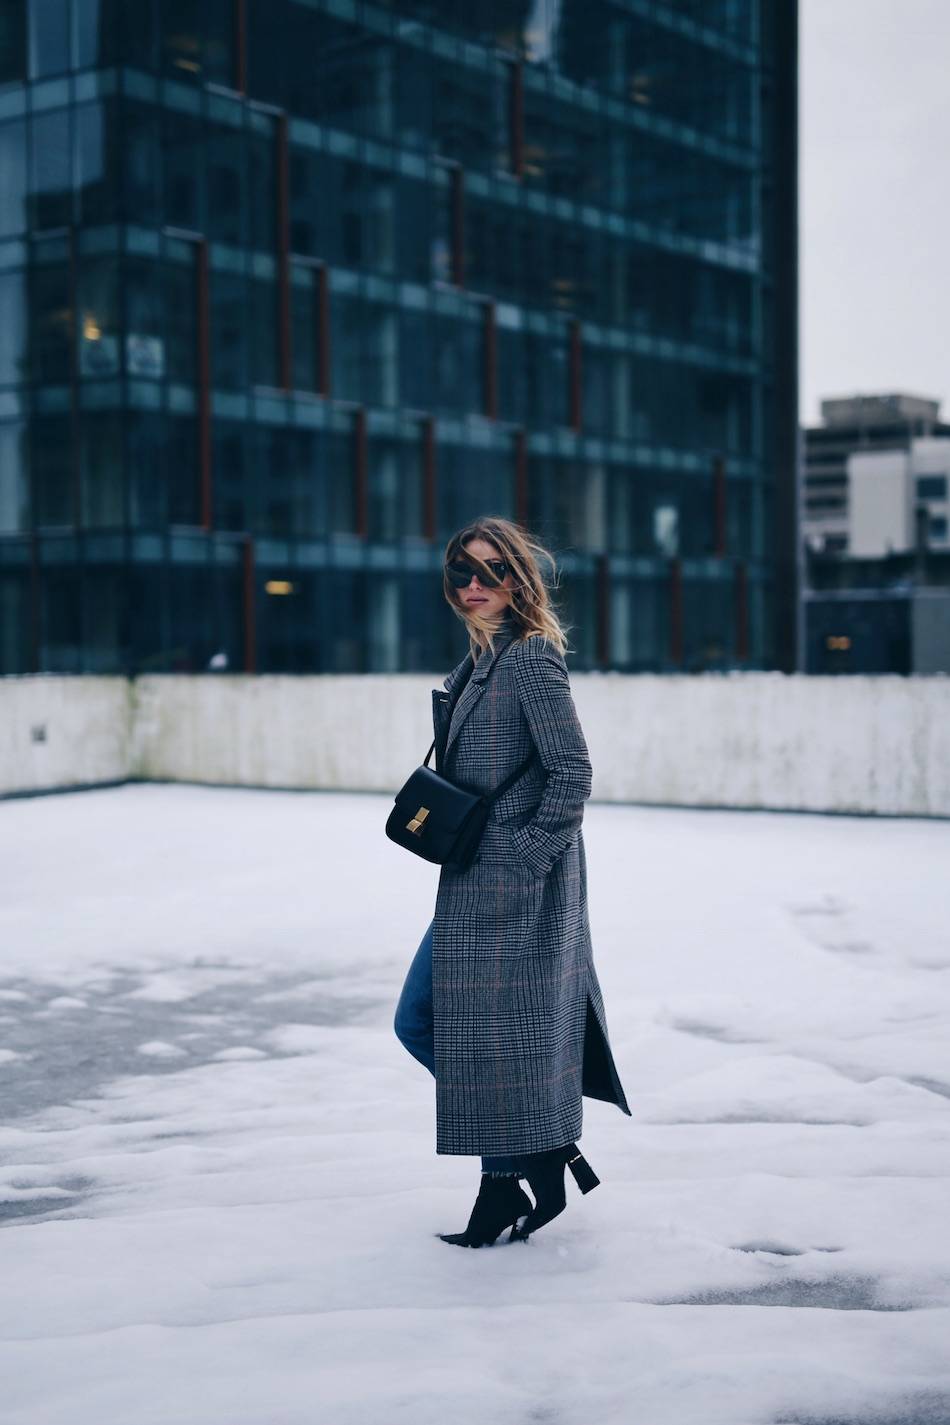 Style and beauty blogger Jill Lansky of The August Diaries on how to wear an H&M plaid coat with Celine black box bag, Celine Caty sunglasses